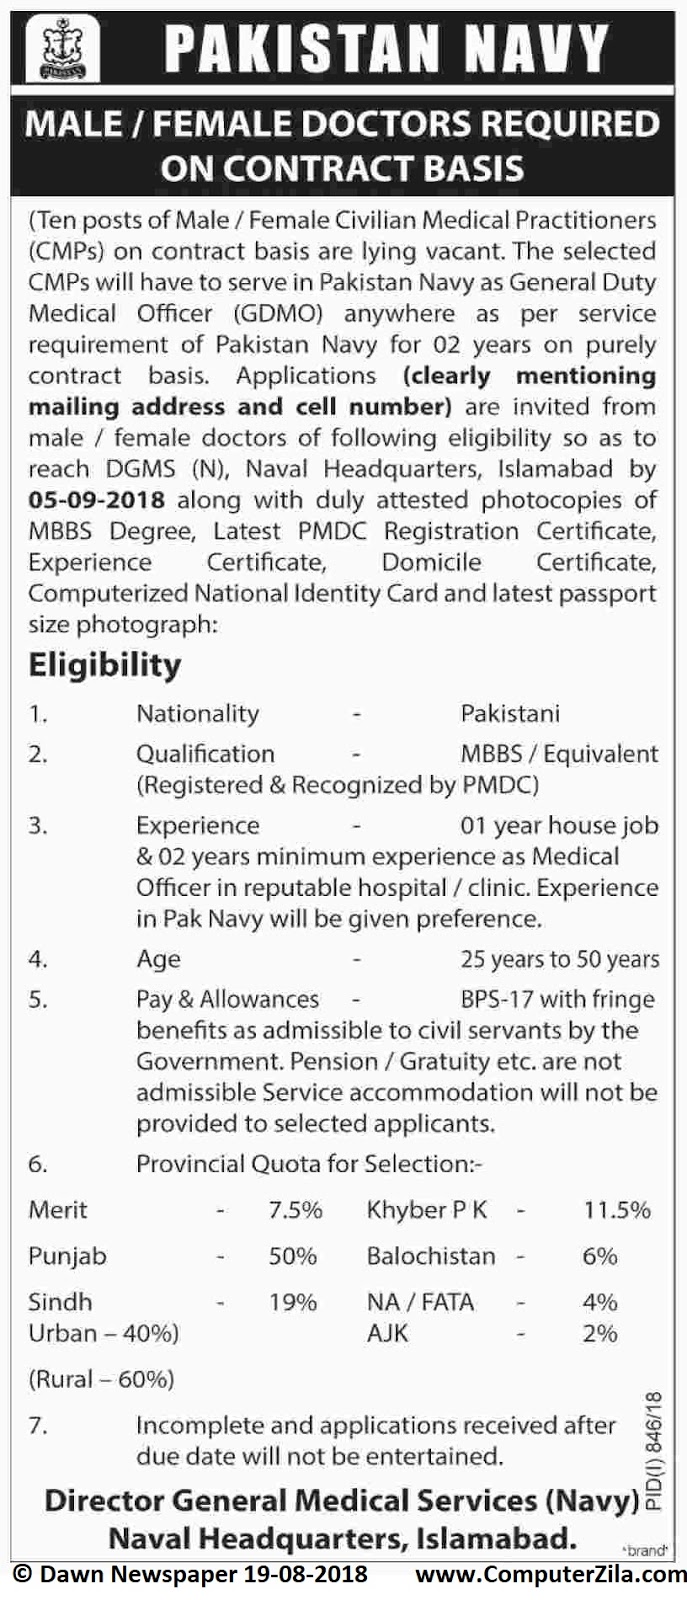 Male / Female Doctors Required on Contract Basis at Pakistan Navy